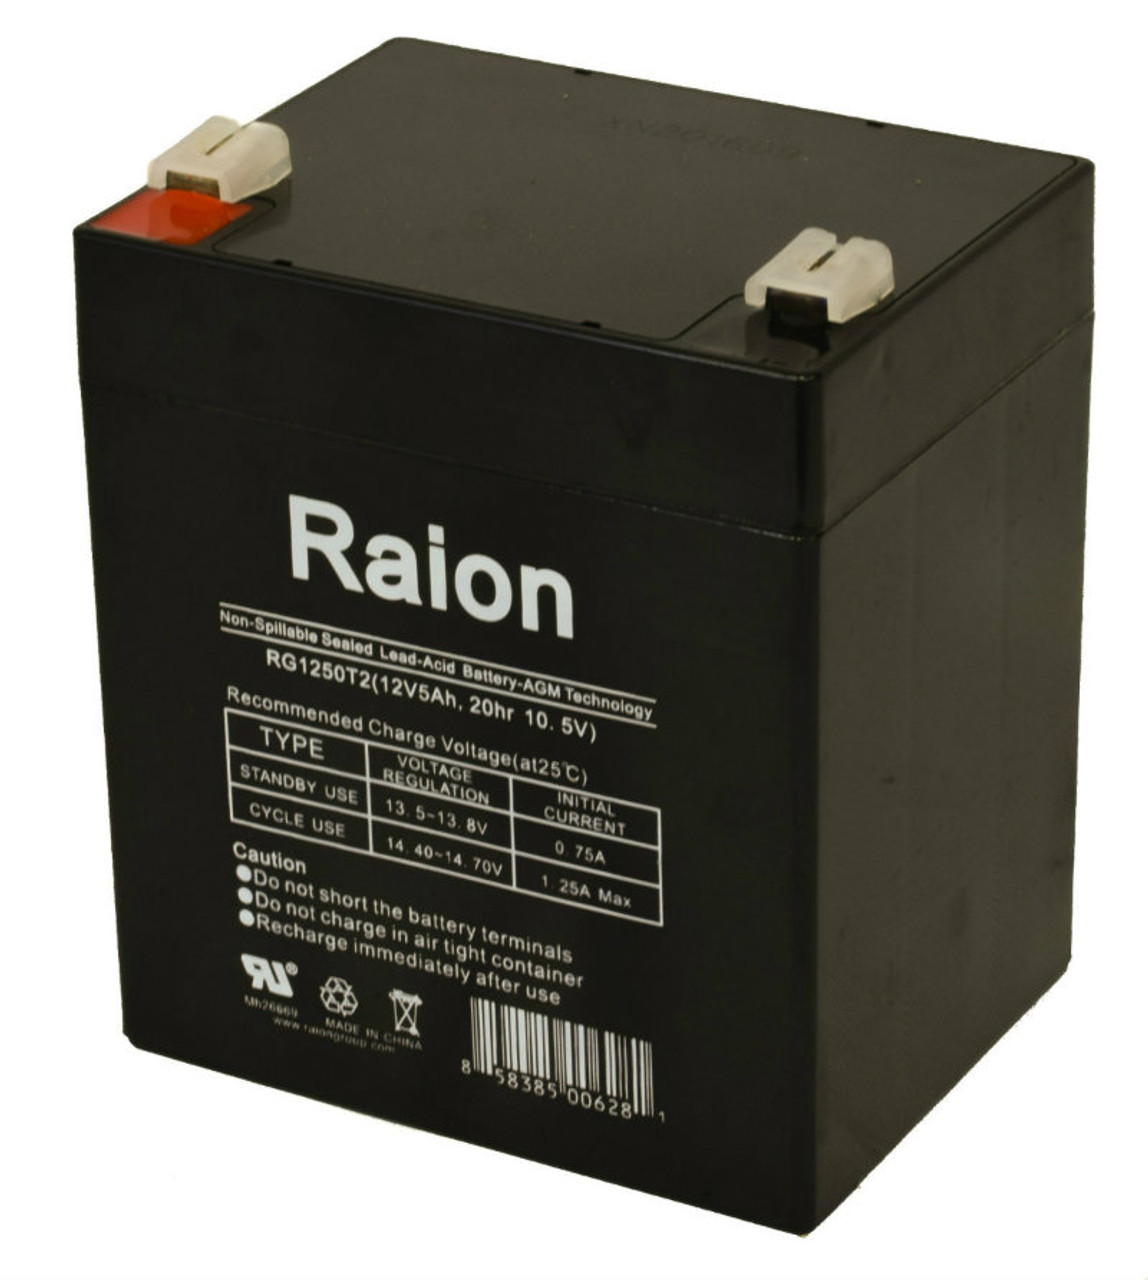 Raion Power RG1250T1 Replacement Battery for Medline Industries MDS400EL Patient Lift